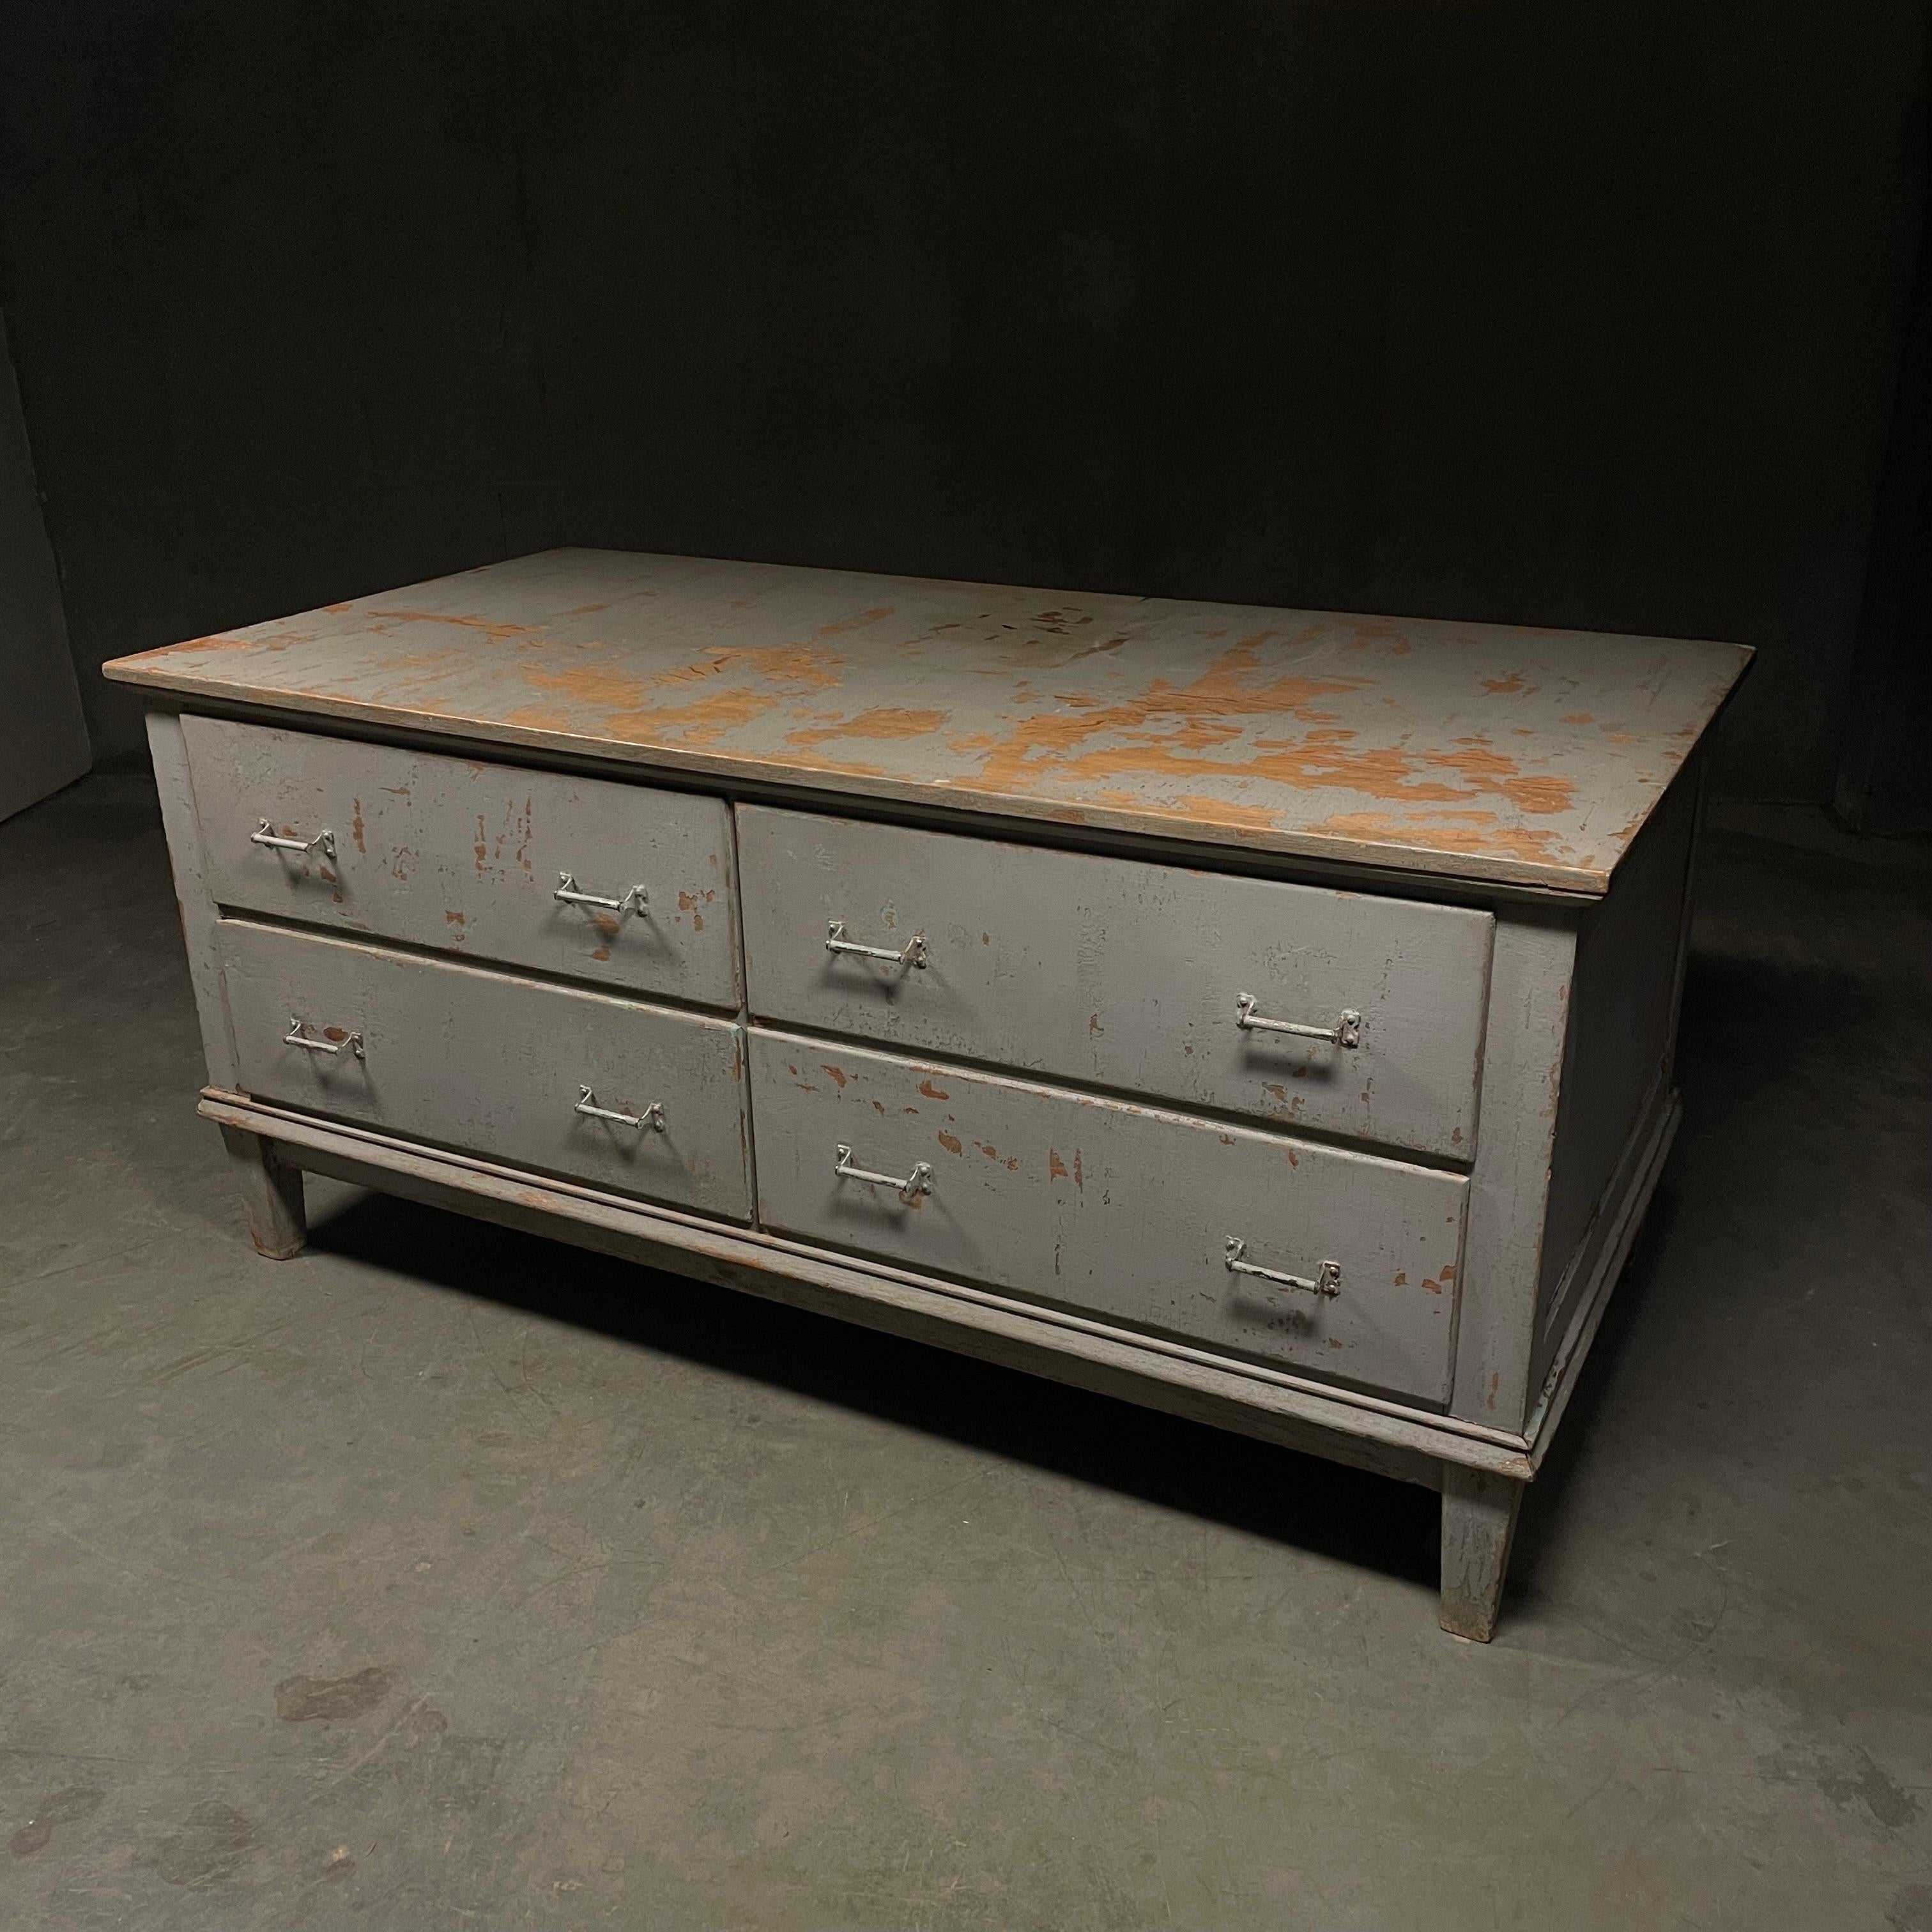 A great original working counter  from a Tailor shop in eastern USA. retains old ;polychrome grey surface  has multiple finished panel sides and four working deep drawers. 
this piece was found in a tailor shop in upper NY .

it currently sits a t